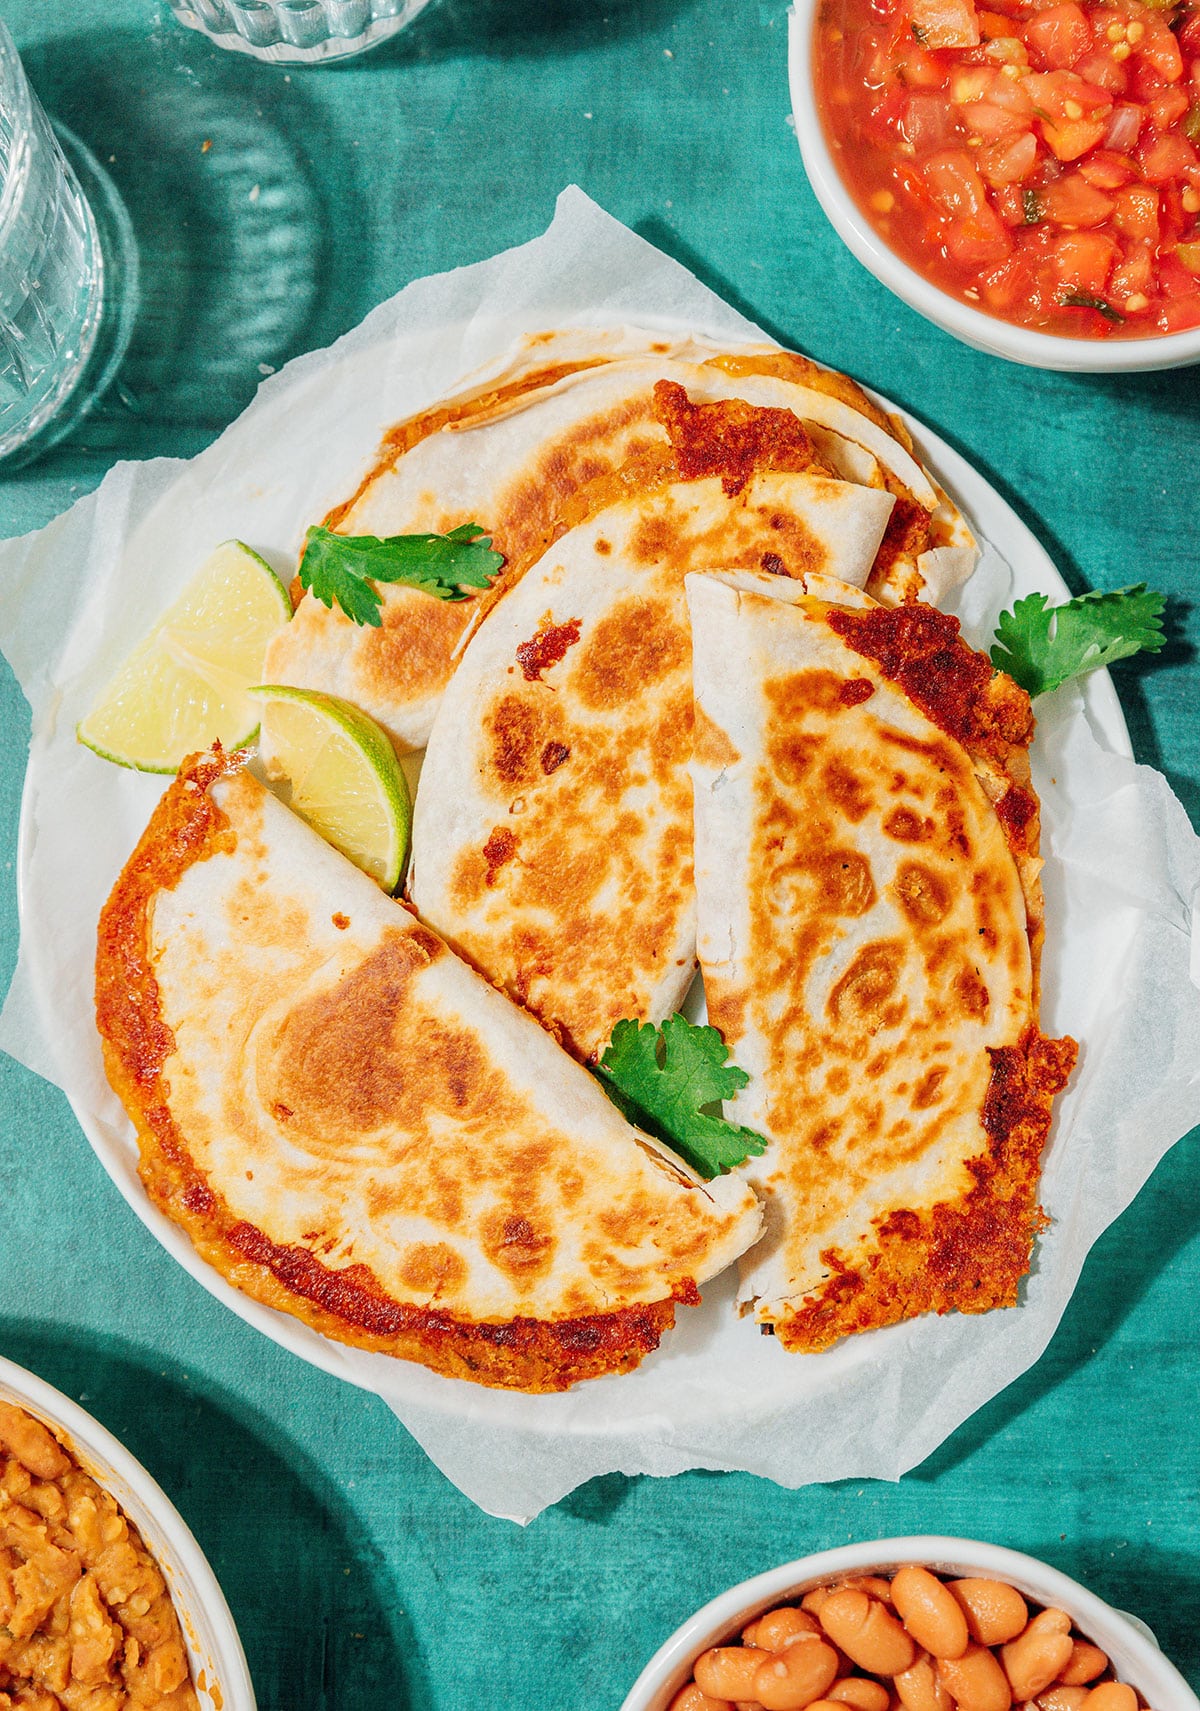 Bean and cheese tacos on a plate.